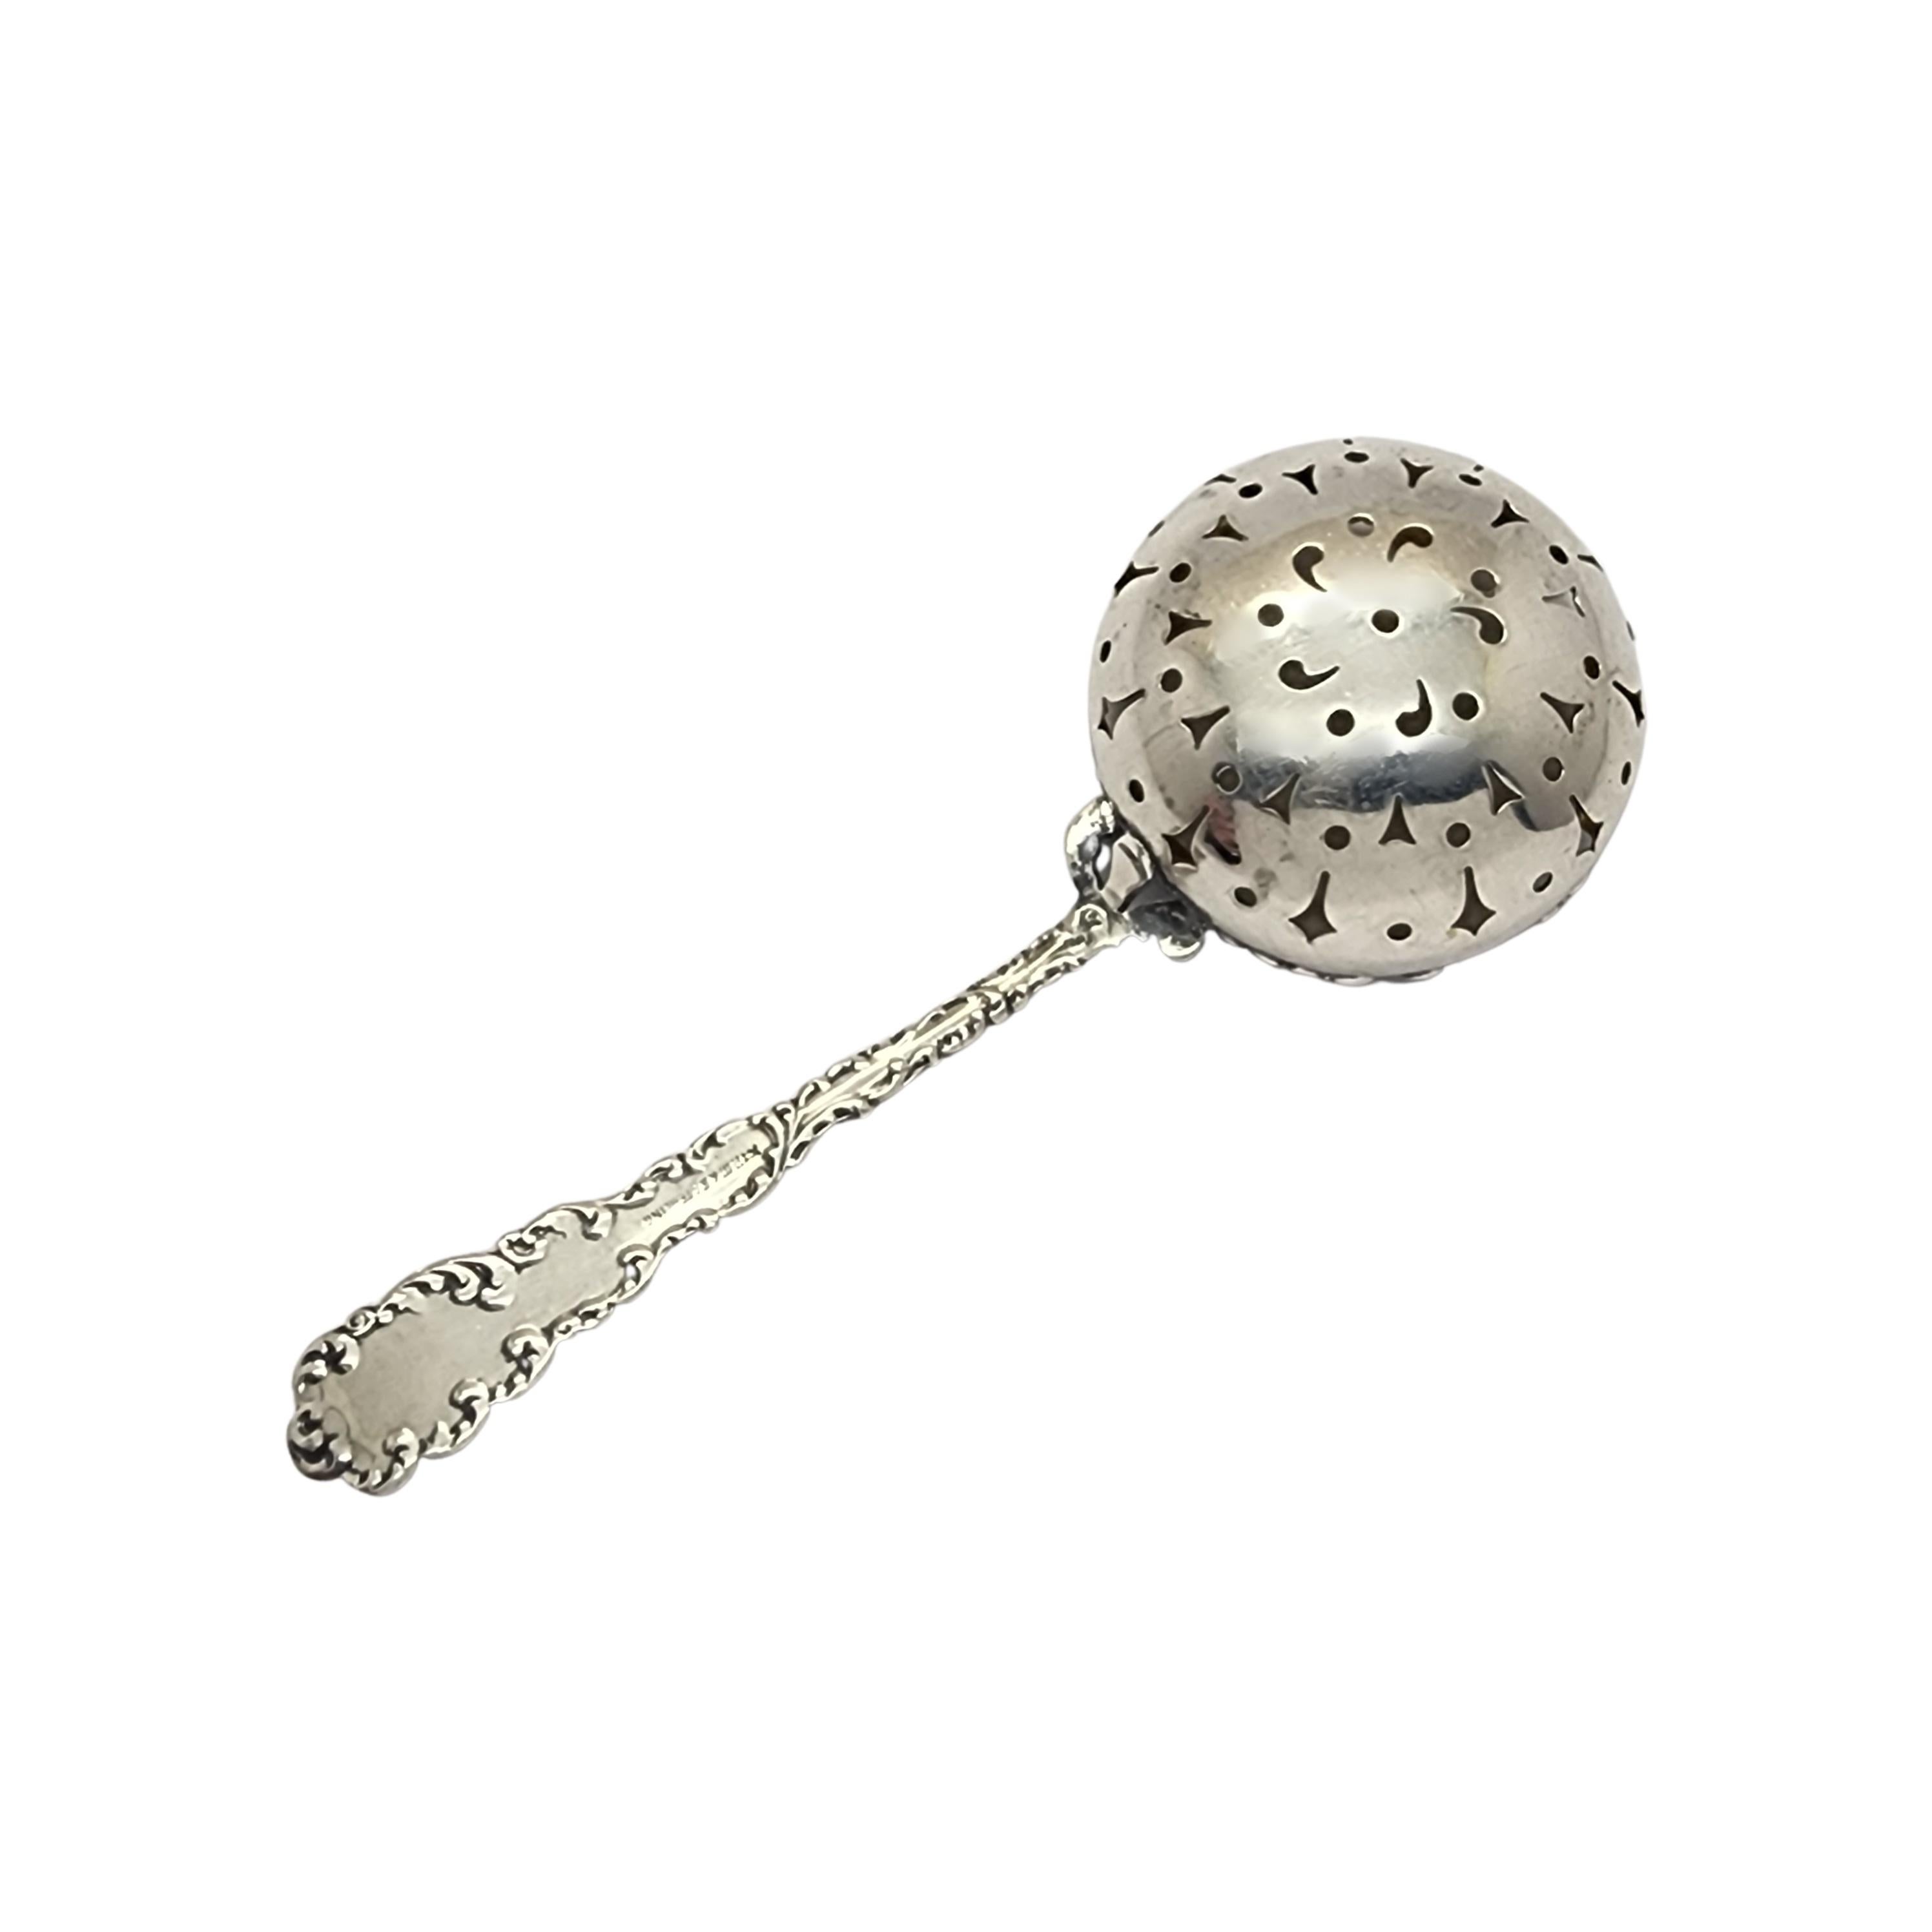 Wallace Sterling Silver Waverly Gold Wash Bowl Tea Strainer with Monogram For Sale 4